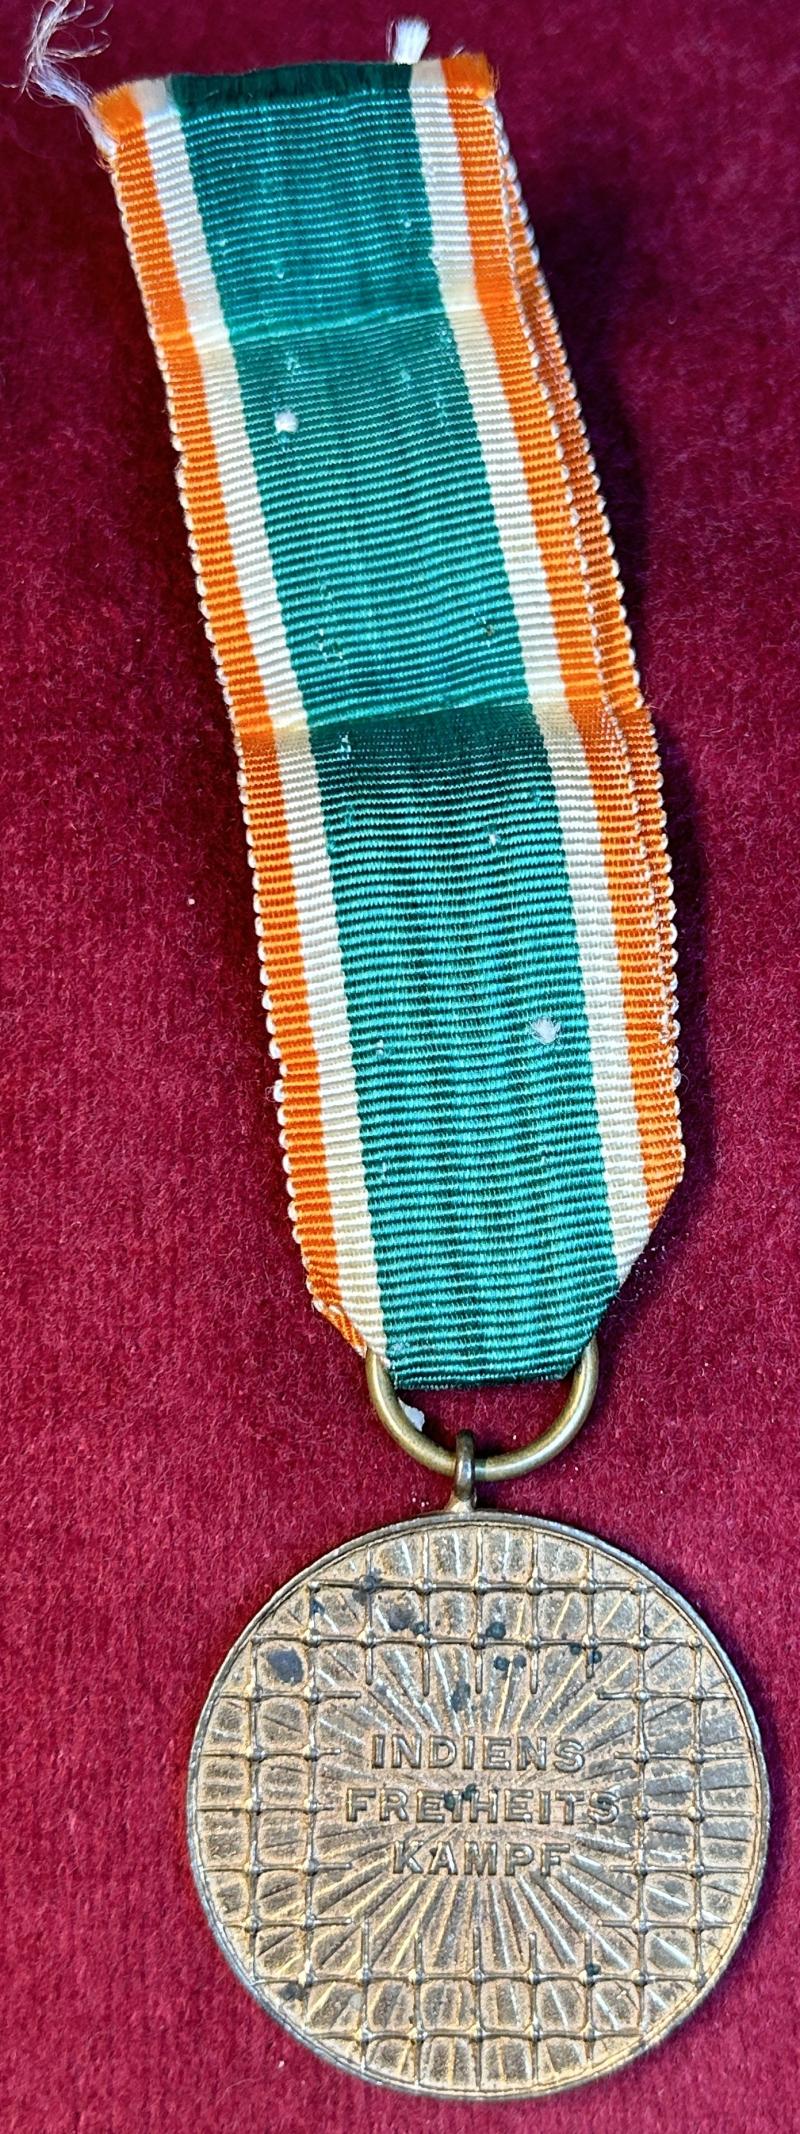 3rd Reich Medaille des Ordens Azad Hind in Gold